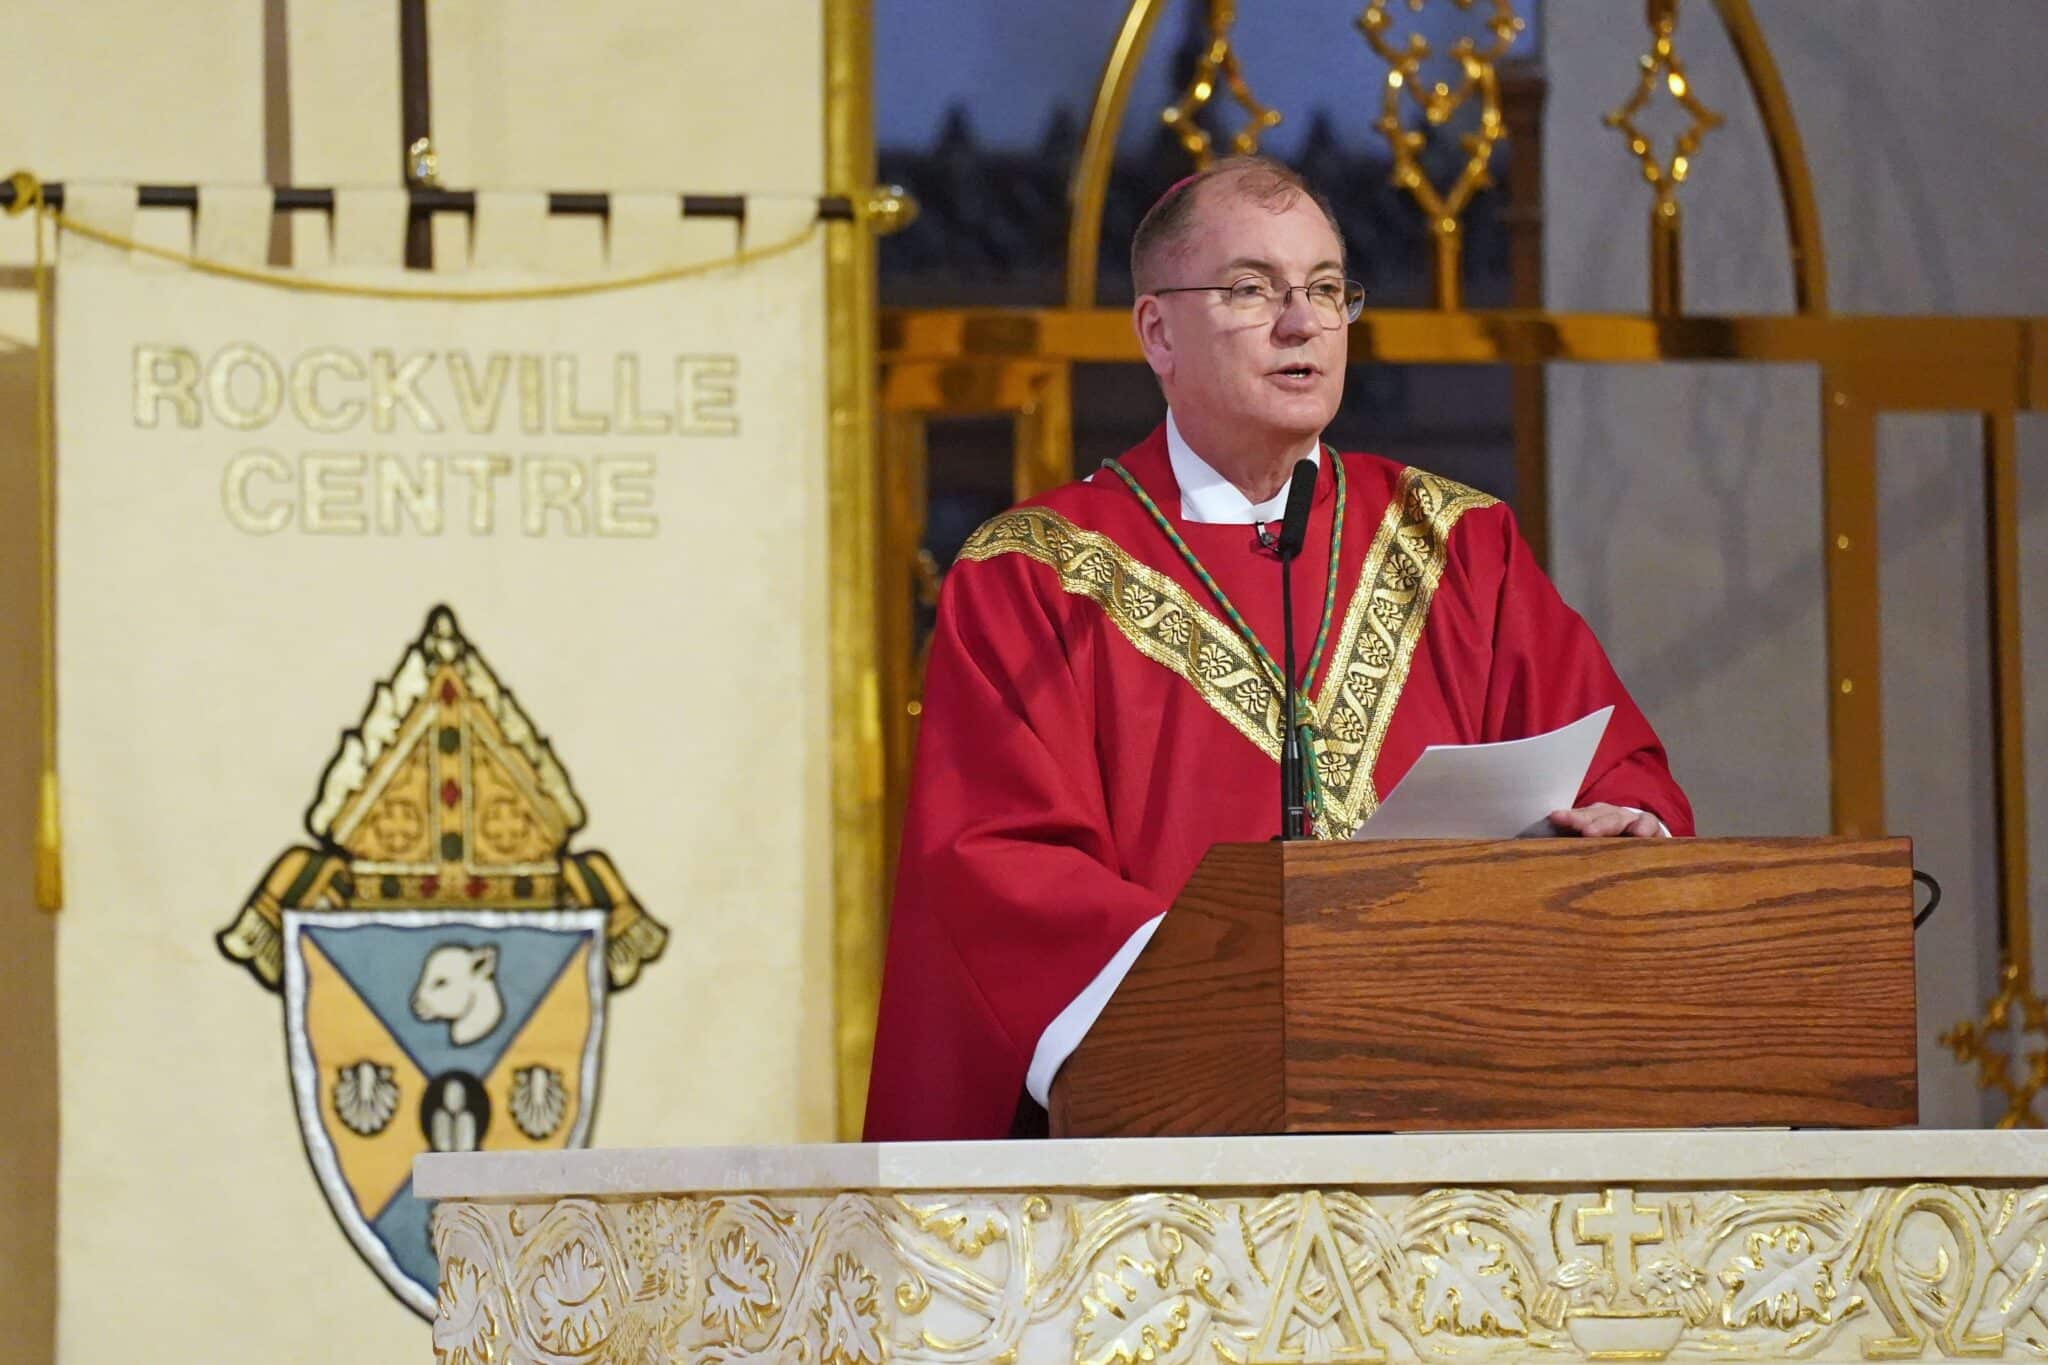 Bishop John O. Barres of Rockville Centre, N.Y., delivers the homily during Mass at St. Agnes Cathedral in Rockville Centre, N.Y., June 29, 2020. A judge may decide to dismiss the bankruptcy case of the Diocese of Rockville Centre, which would be a national first. (OSV News photo/Gregory A. Shemitz)